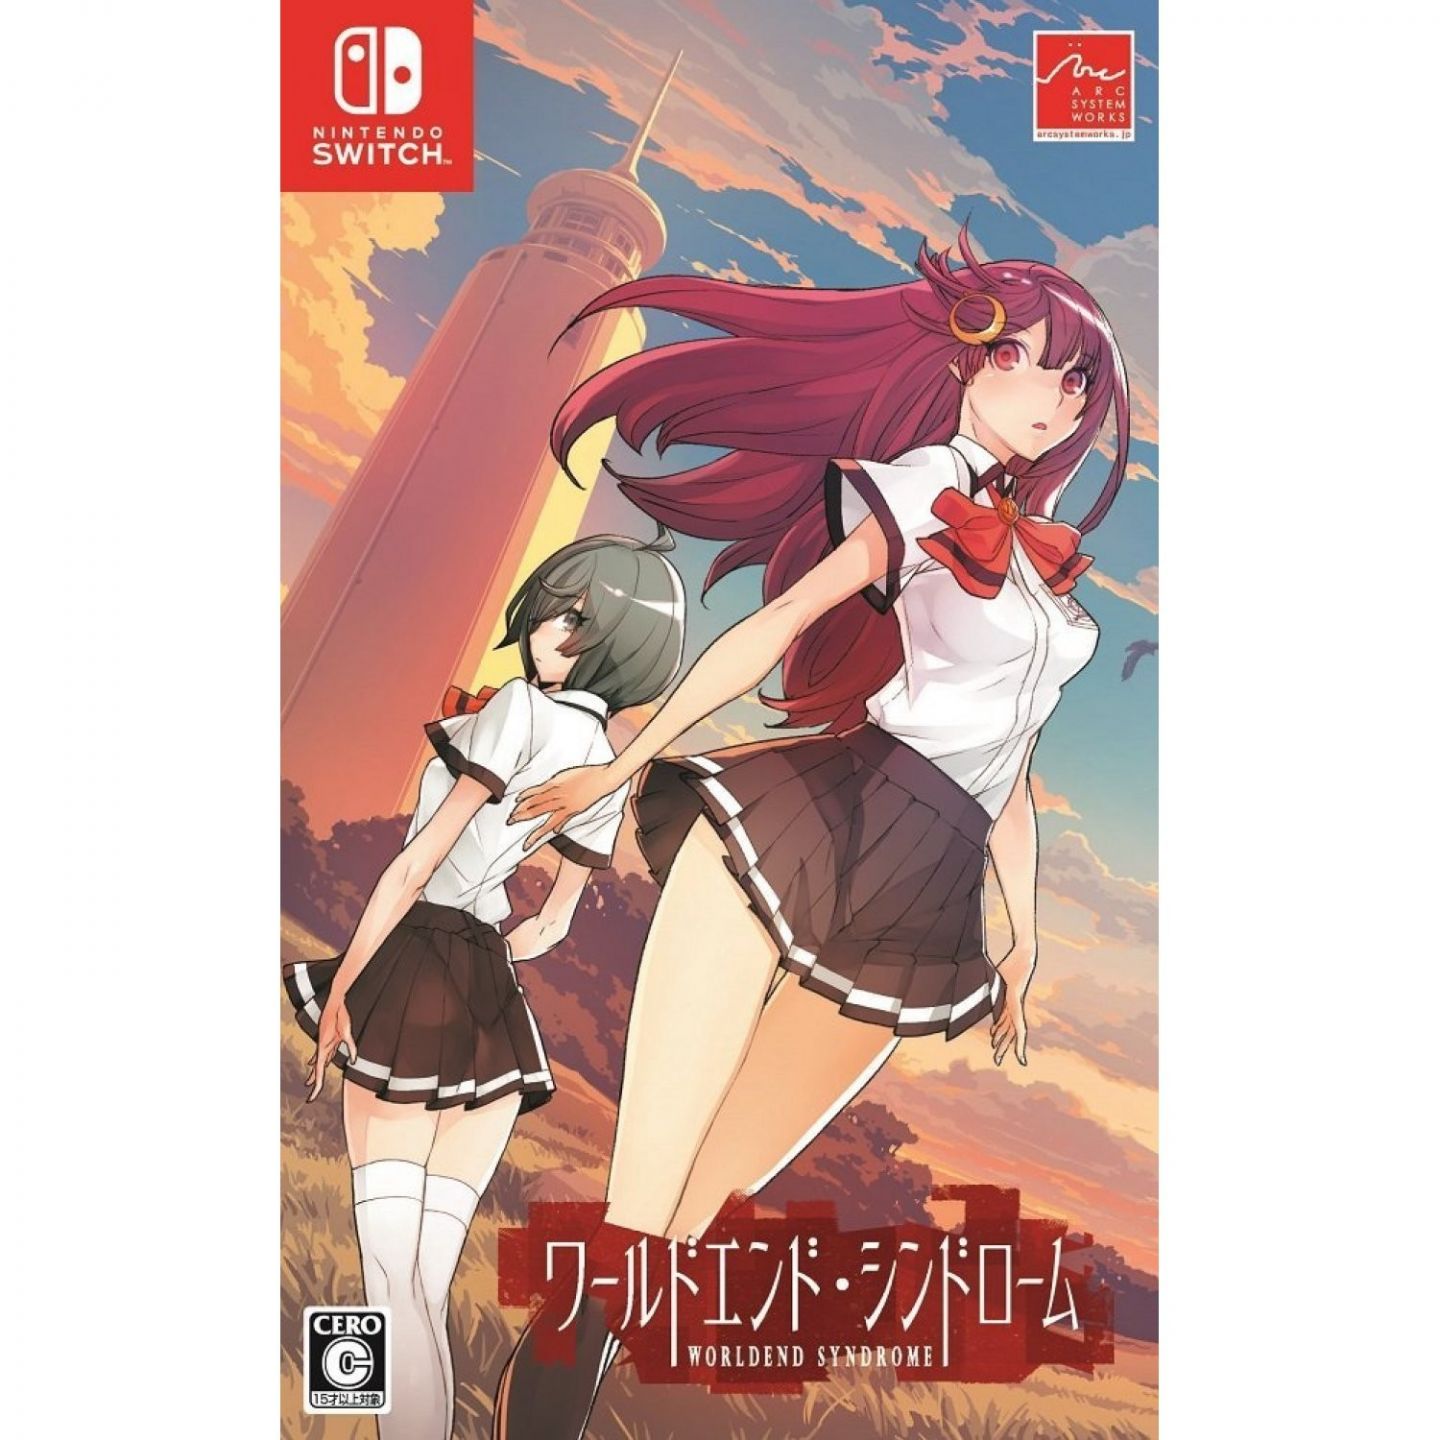 Arc System Works World End Syndrome NINTENDO SWITCH